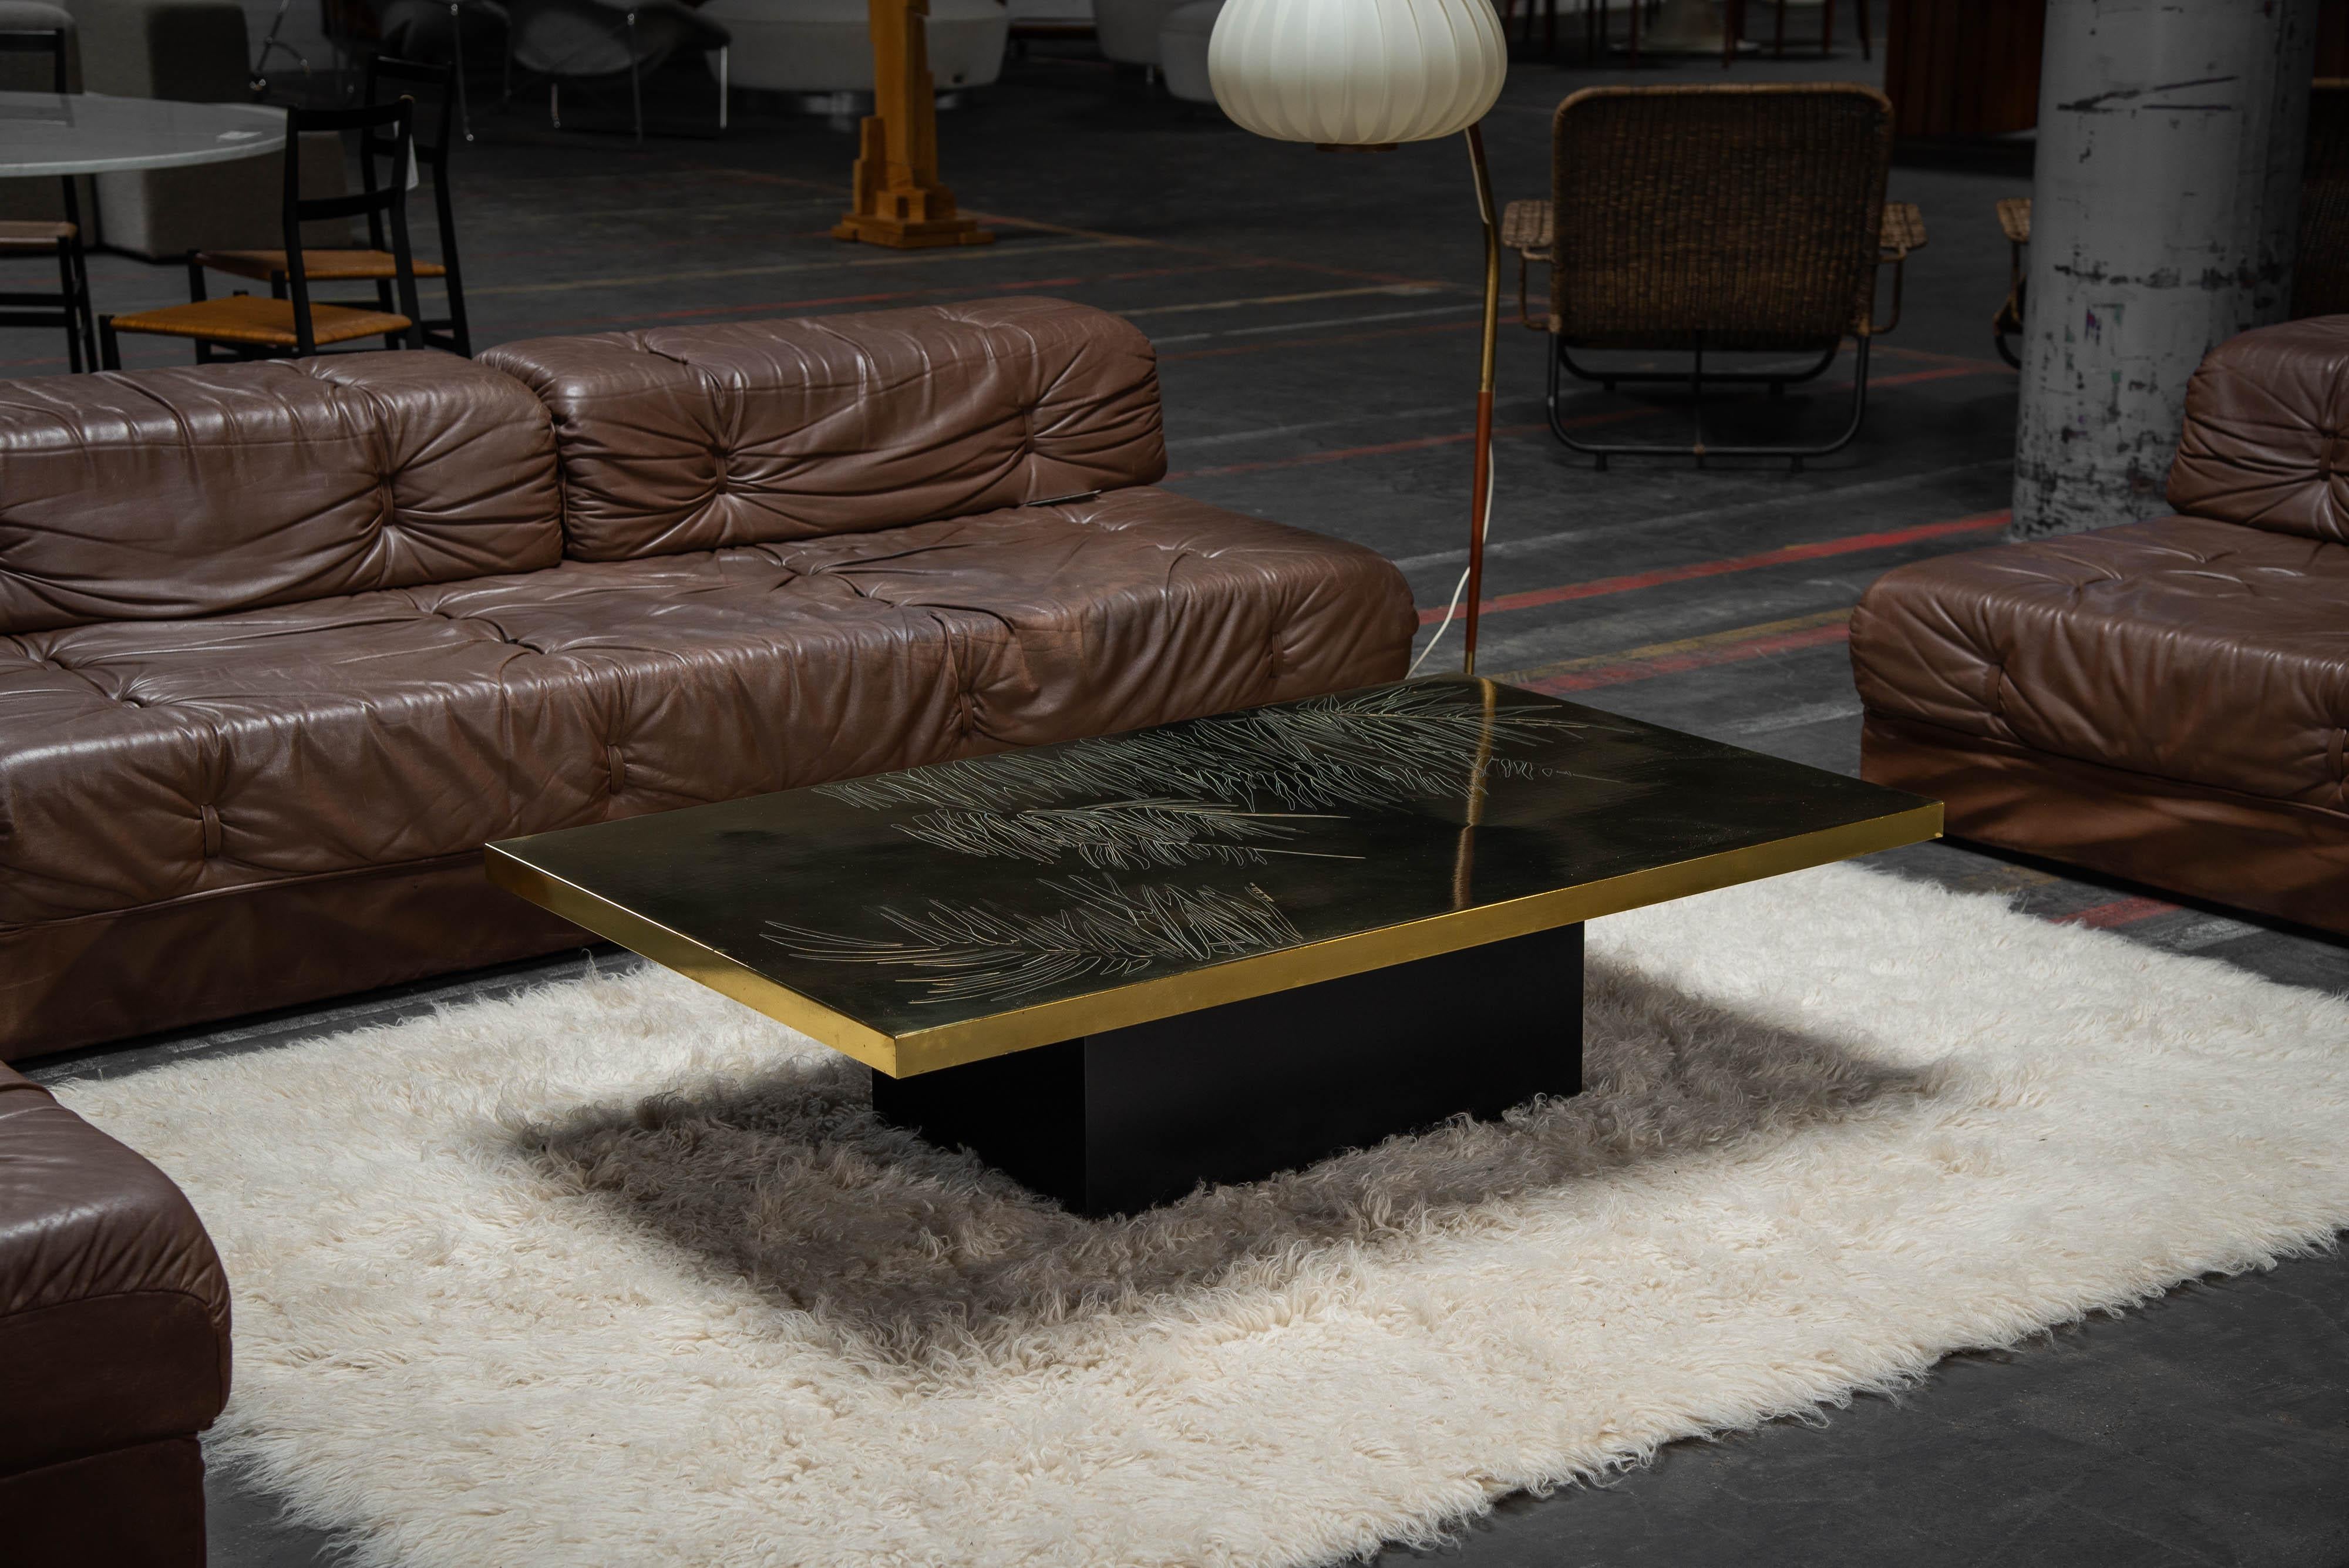 Decorative coffee table designed and made by Christian Krekels in Belgium in 1977. The table got a sturdy black wooden base and a beautiful and warm colored brass top with a beautiful floral leaf design. The brass part has been etched, making it